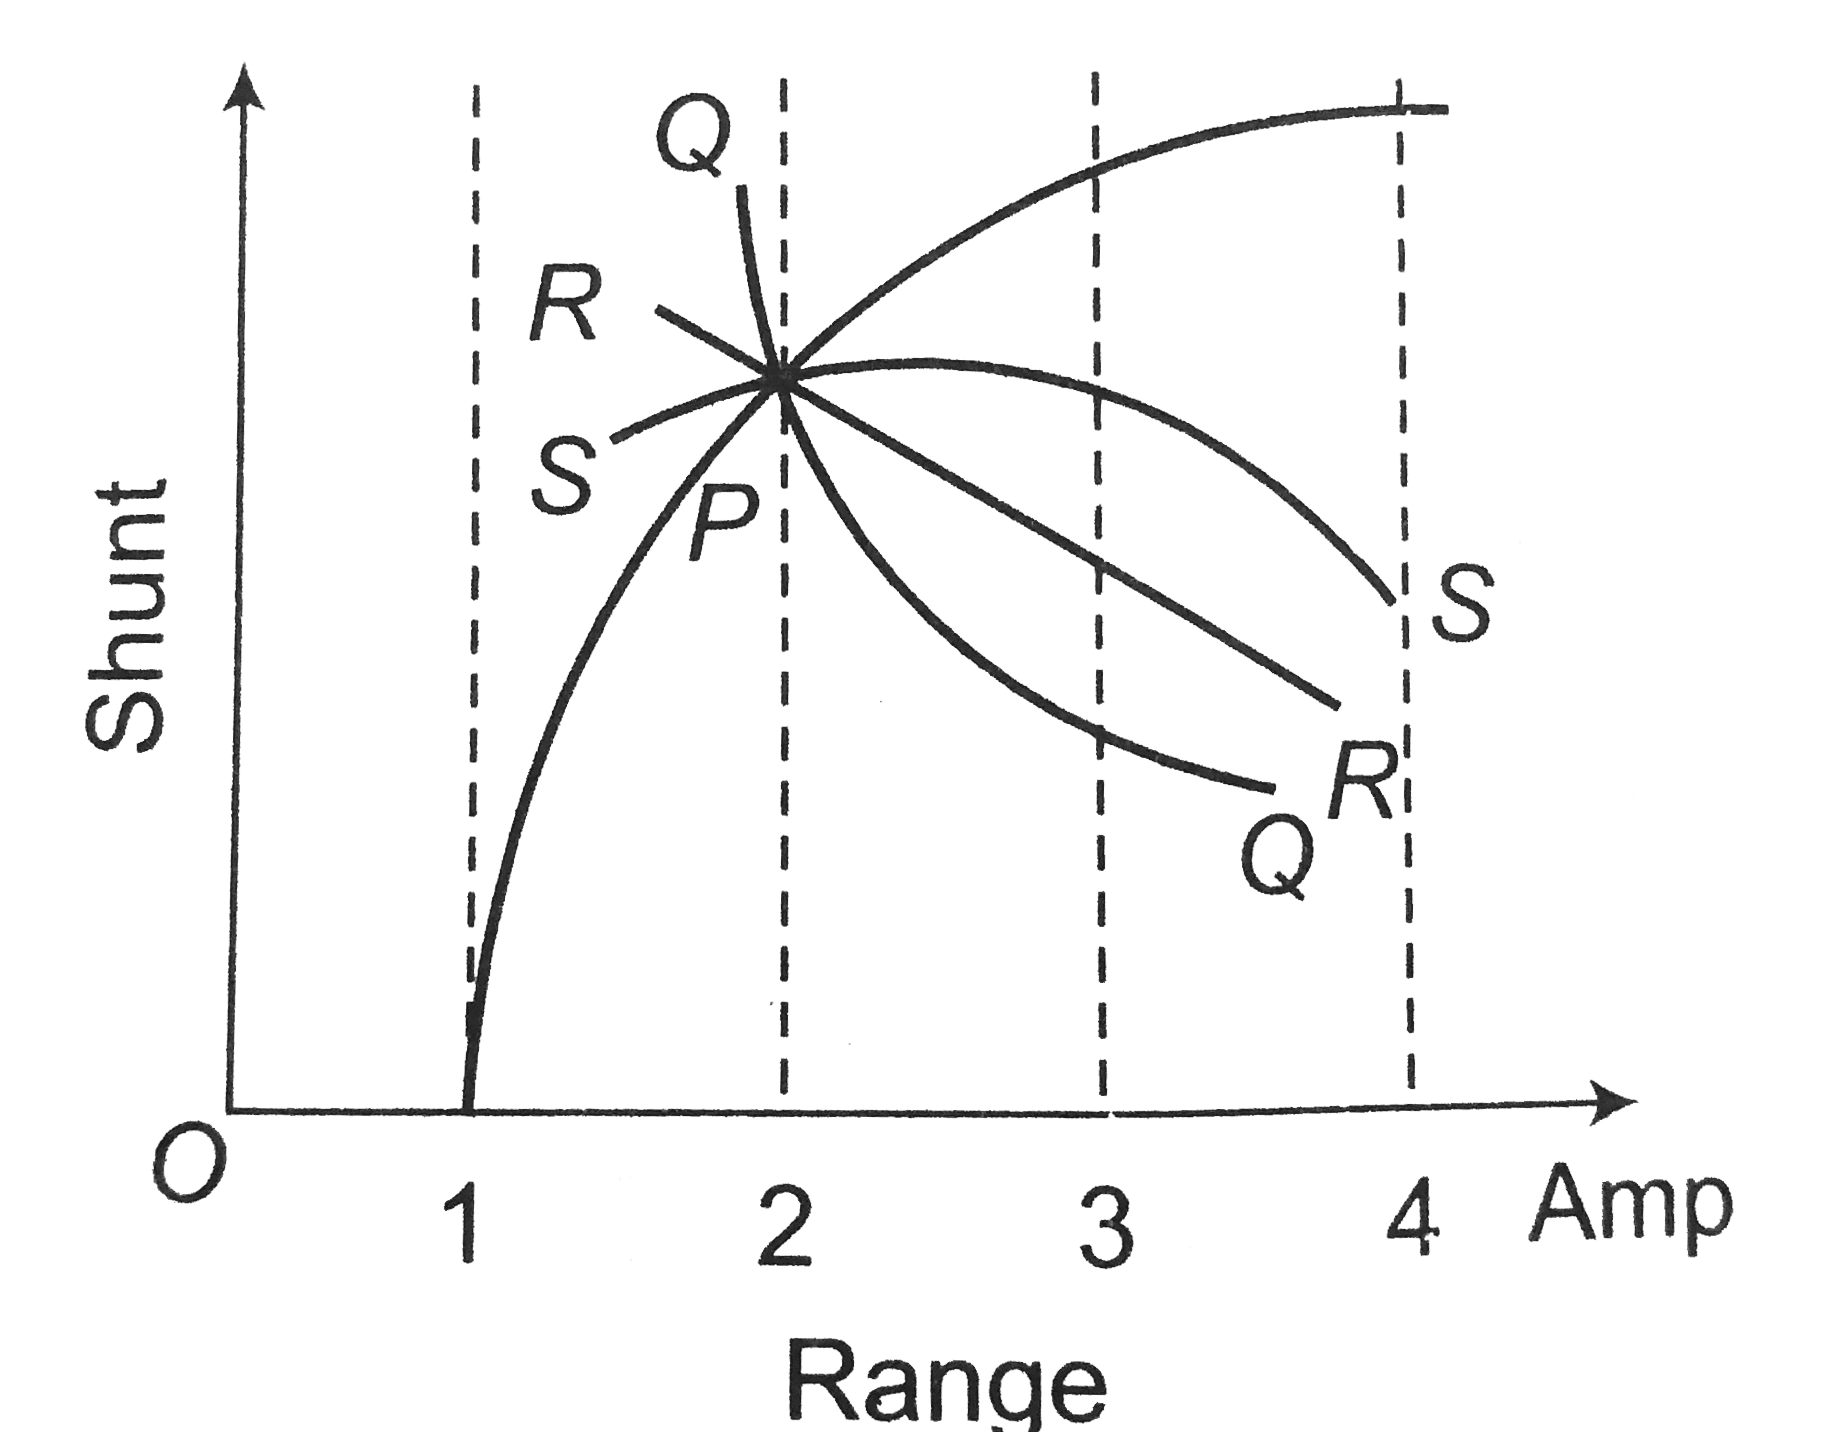 The ammeter has range 1 ampere without shunt. The range can be varied by using different shunt resistance. The graph between shunt resistance and range will have the nature